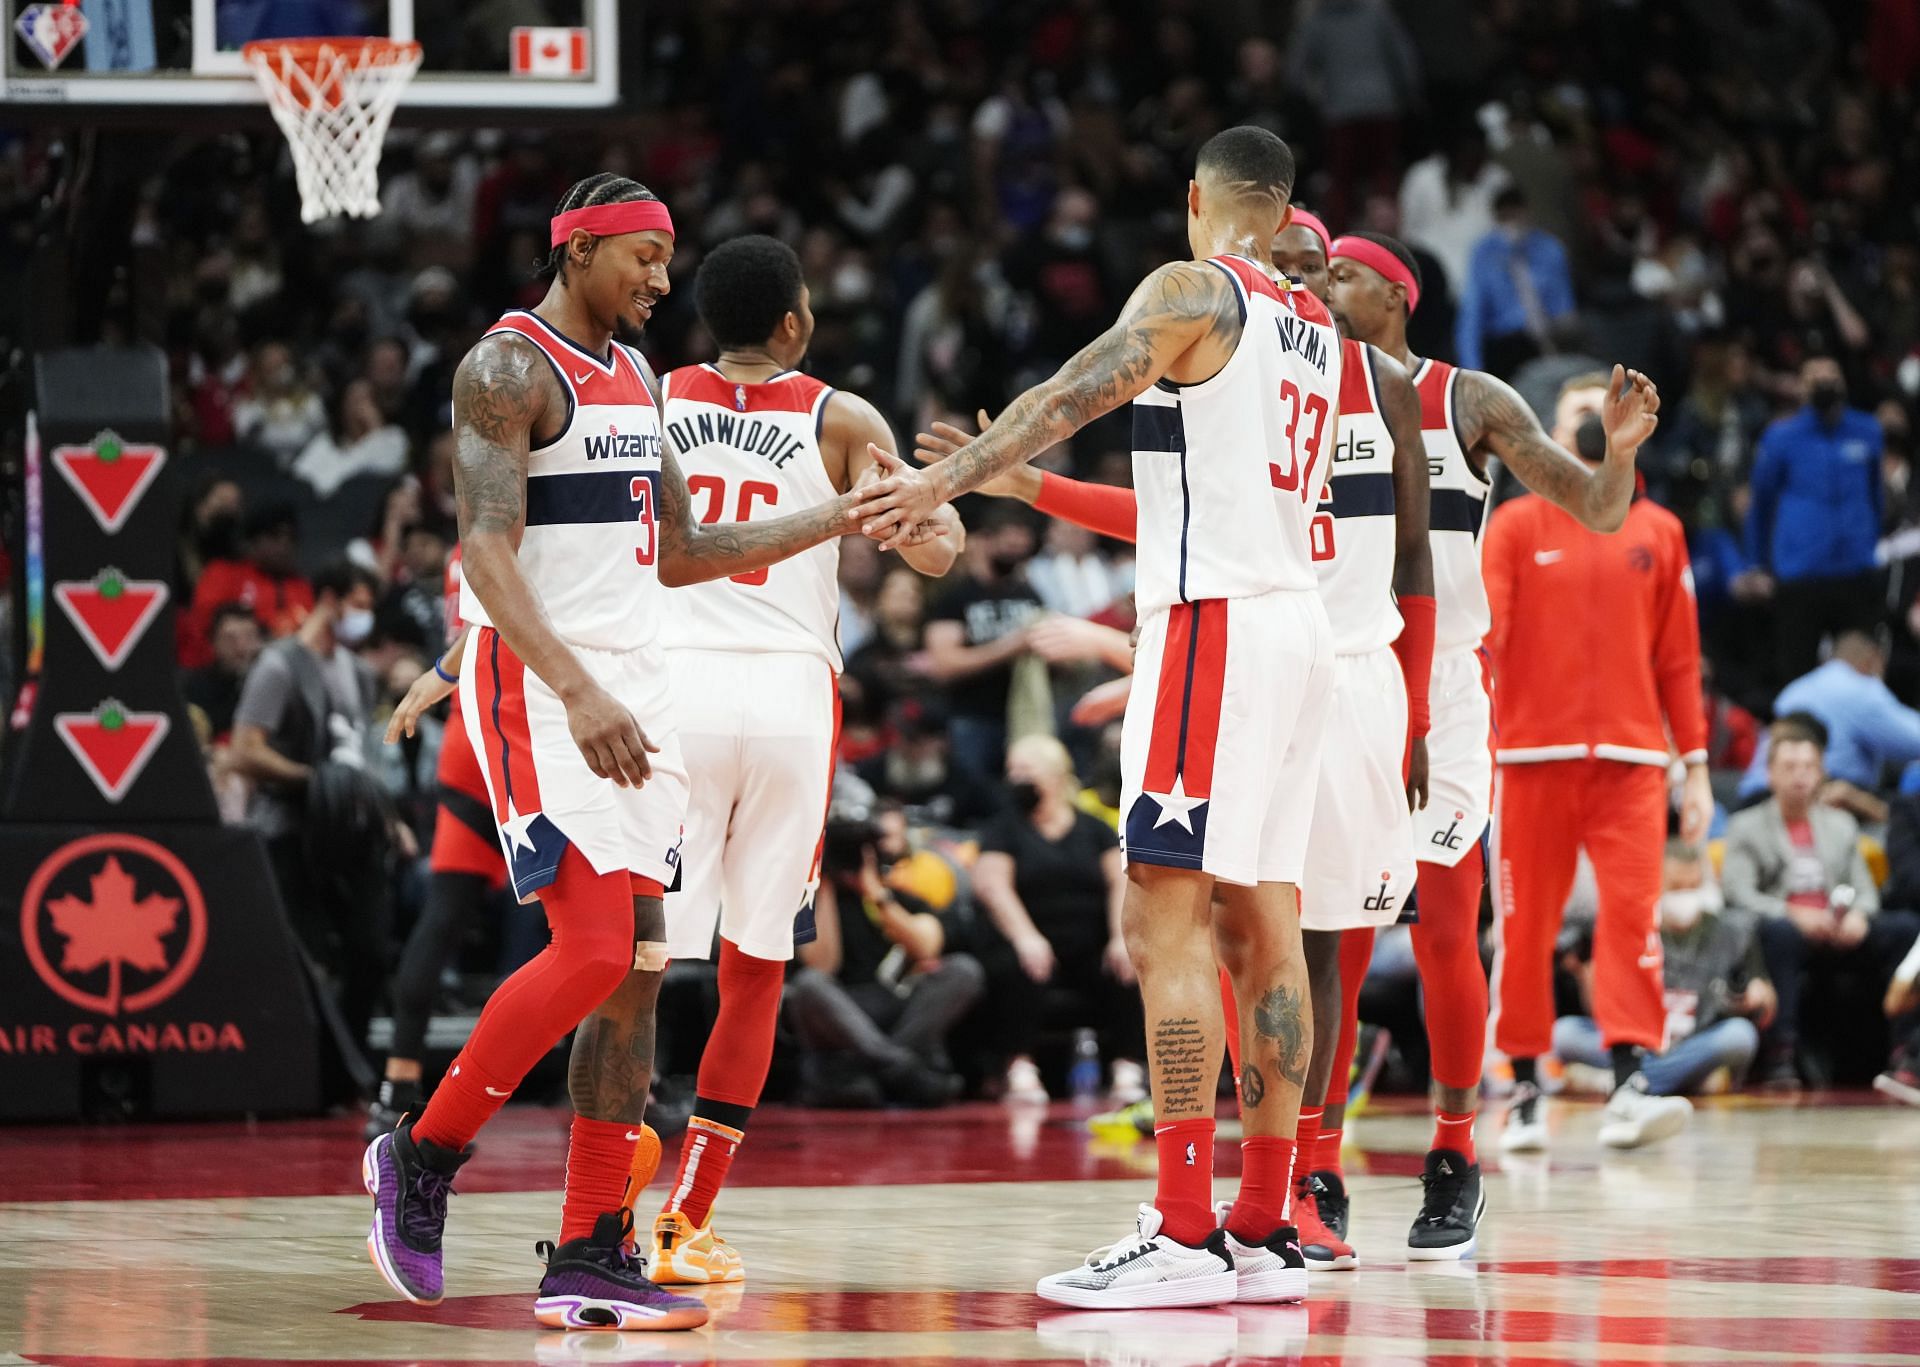 The Washington Wizards defeated the Toronto Raptors in their first game of the season.